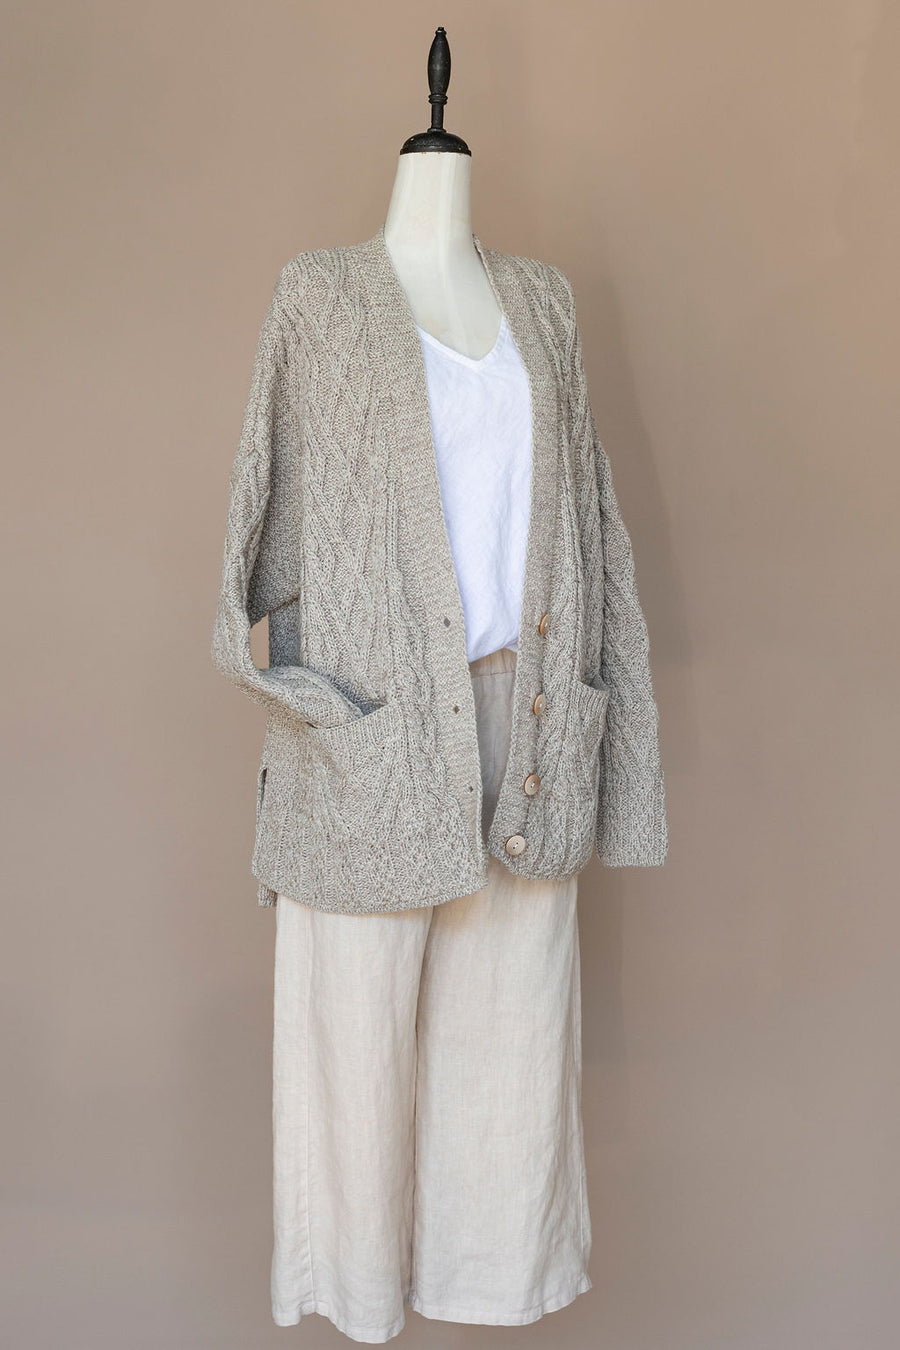 Aran - V-neck Cable Cardigan with Buttons - Feather grey